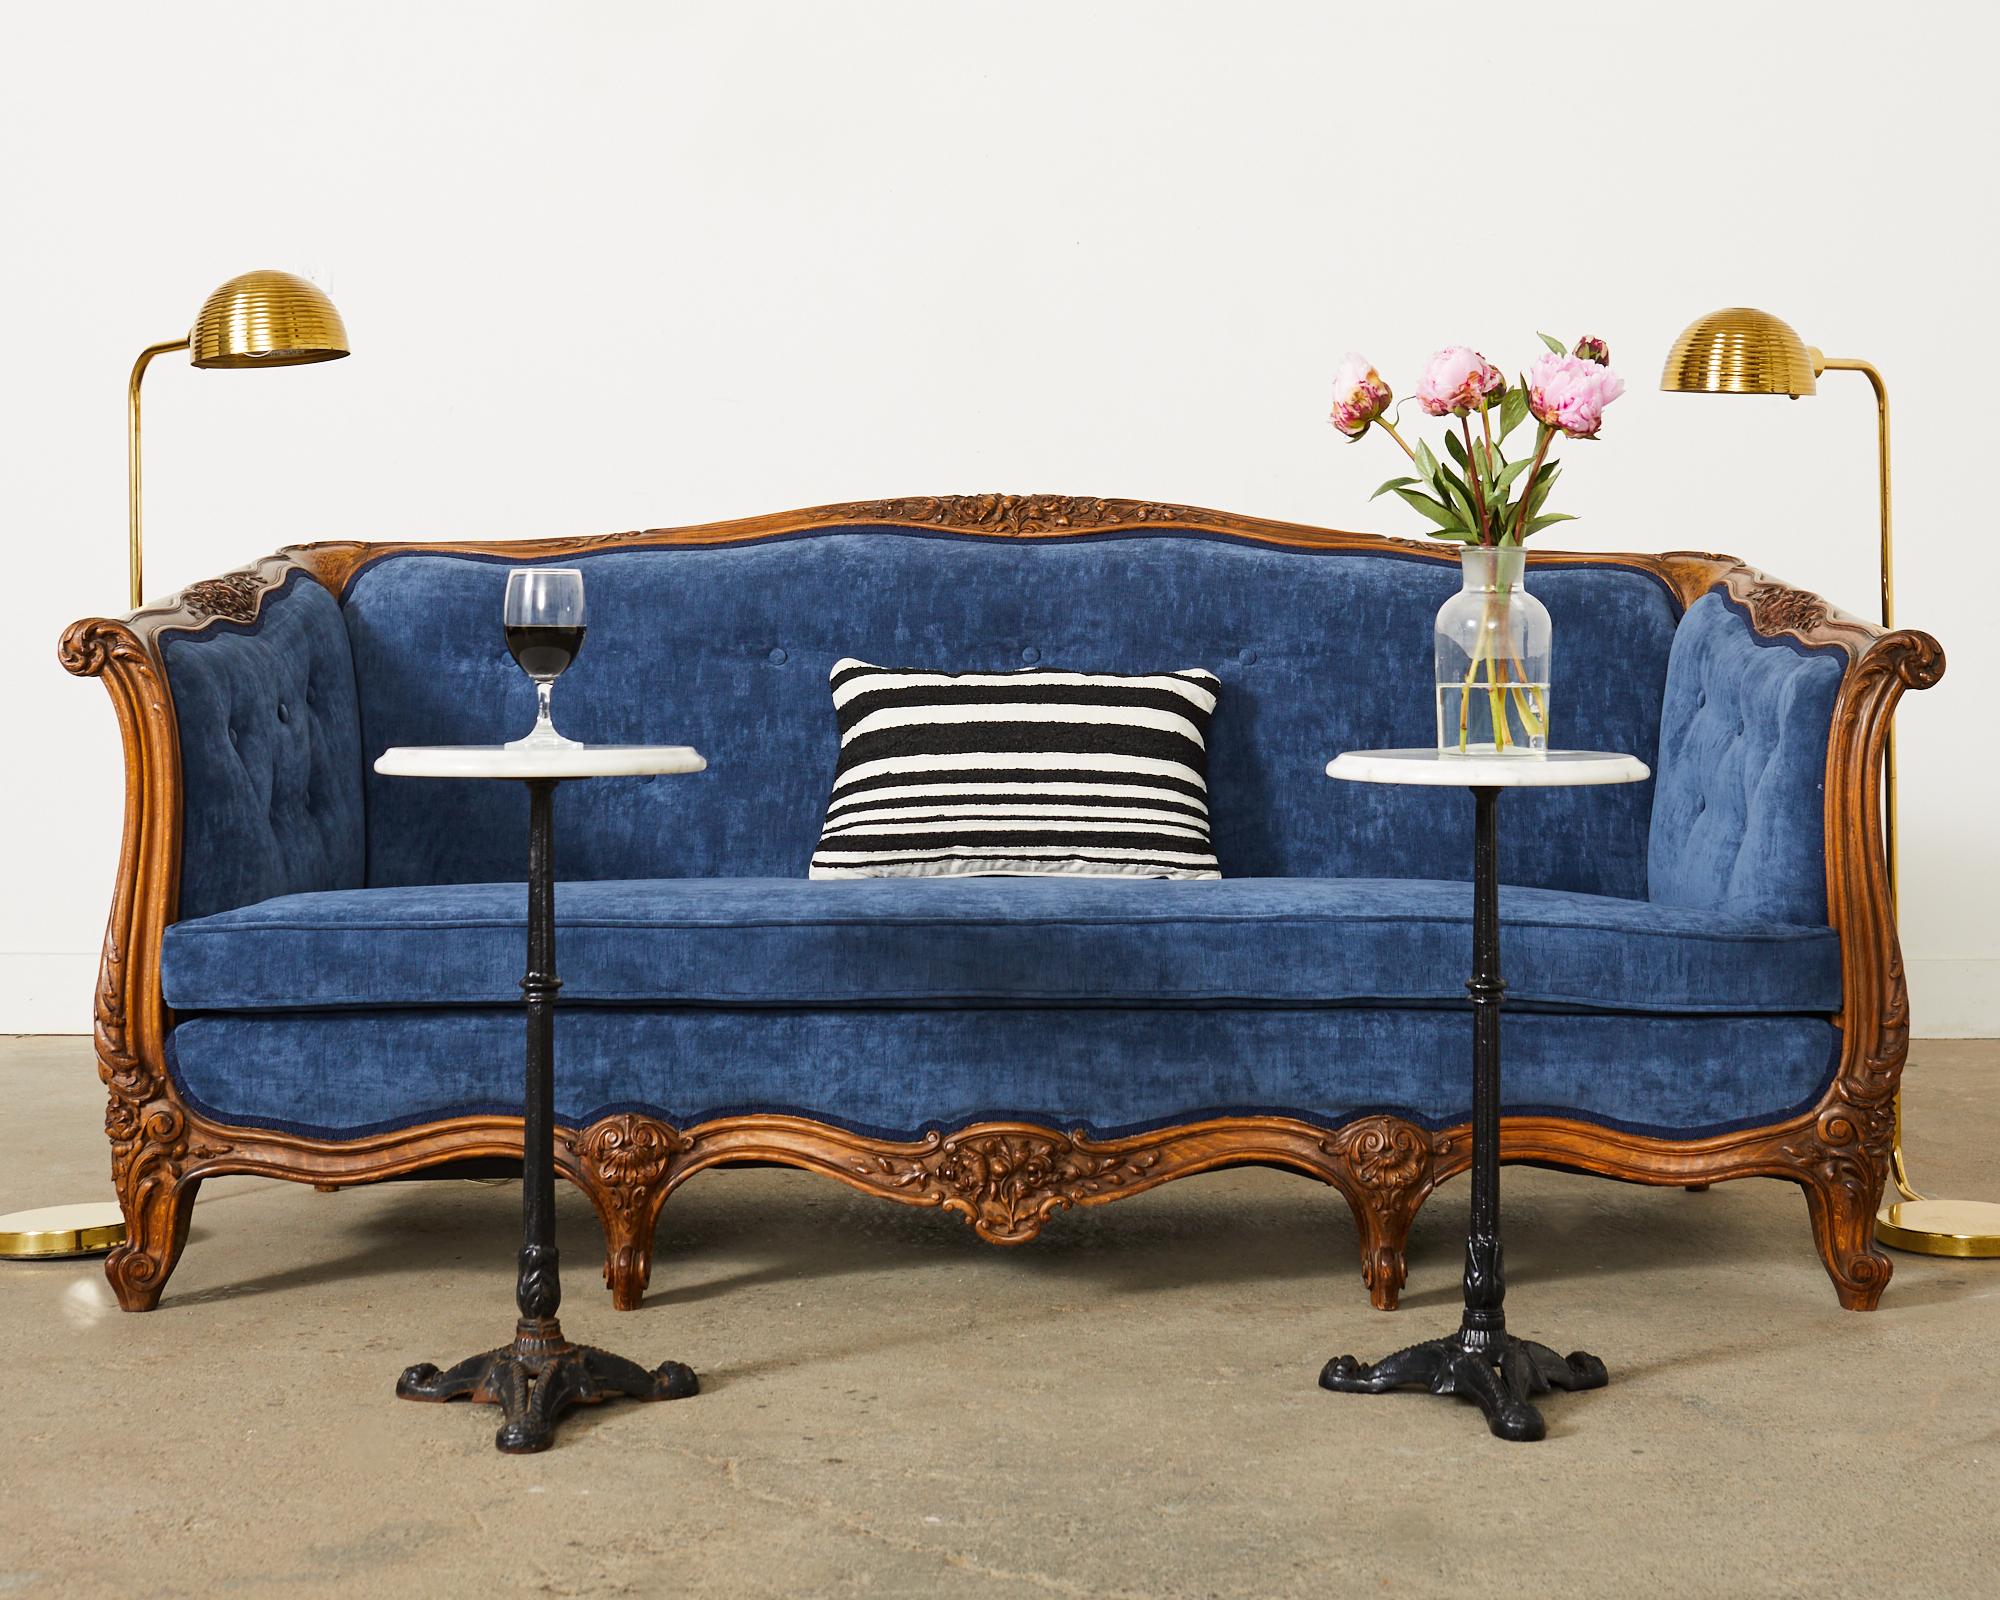 Opulent walnut canapé or sofa made in the country French provincial or Louis XV taste. The sofa features an elaborately carved case with scrolling acanthus and floral sprays. The frame is upholstered with a stunning French blue velvet giving the